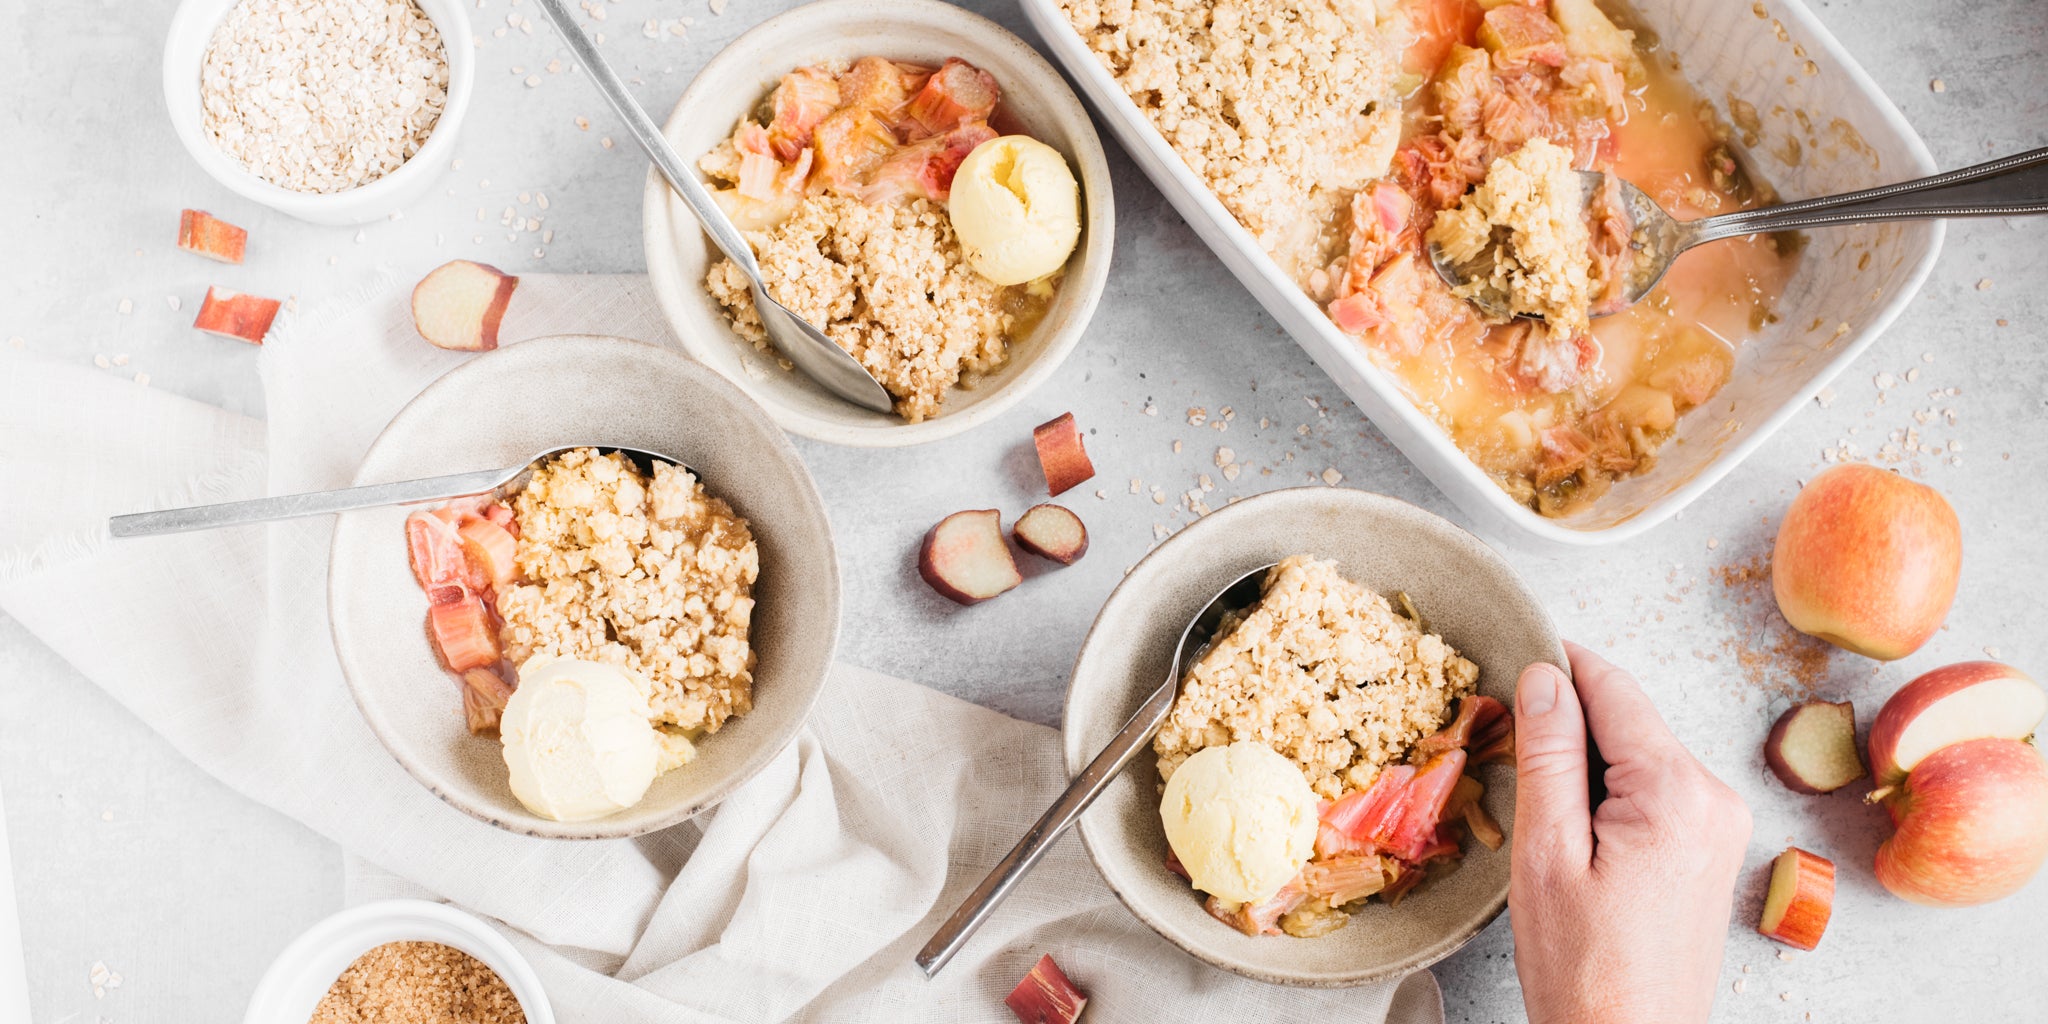 Crumble served up with leftovers in baking dish